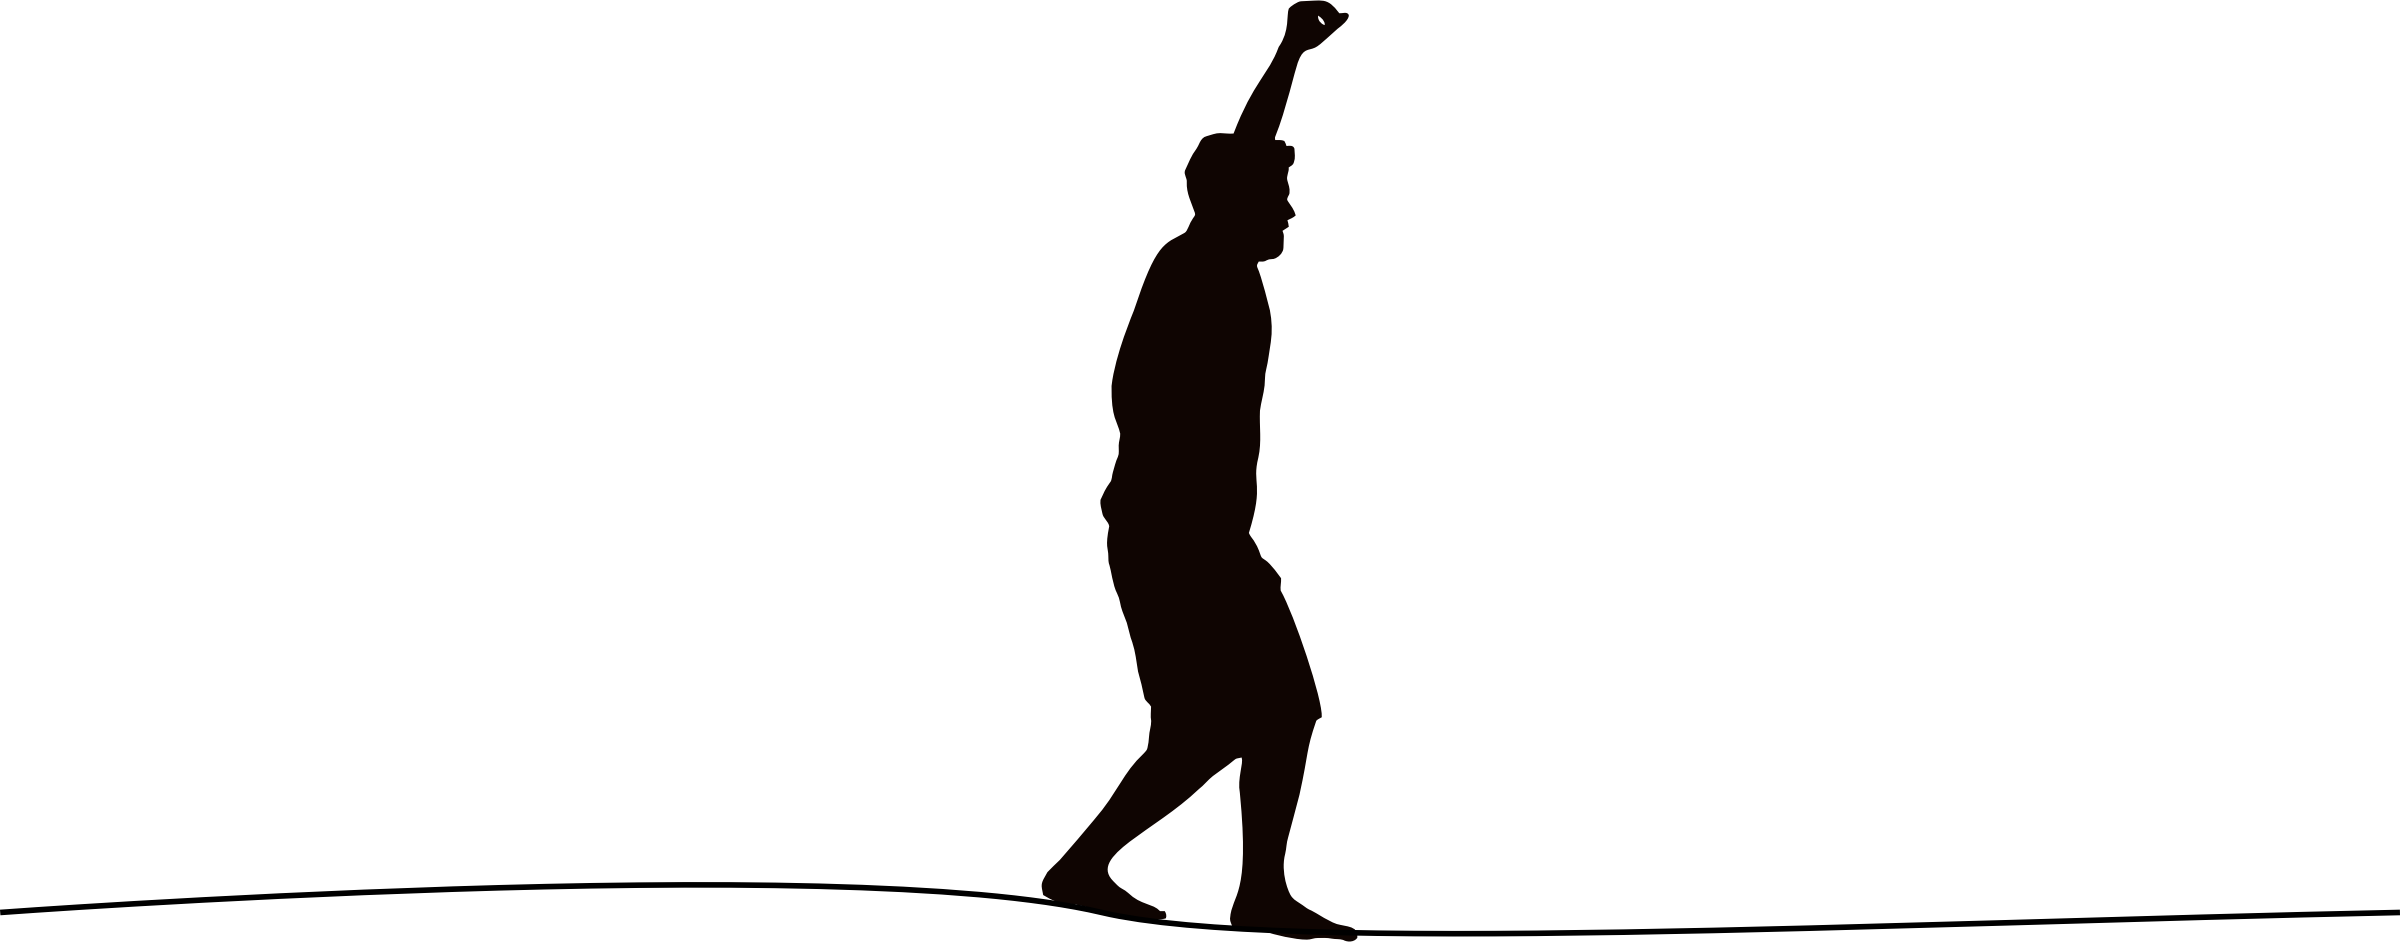 Tightrope Walker Silhouette 2 - Tightrope (please. Does Anyone Know?) - Above And Beyond (2400x942)